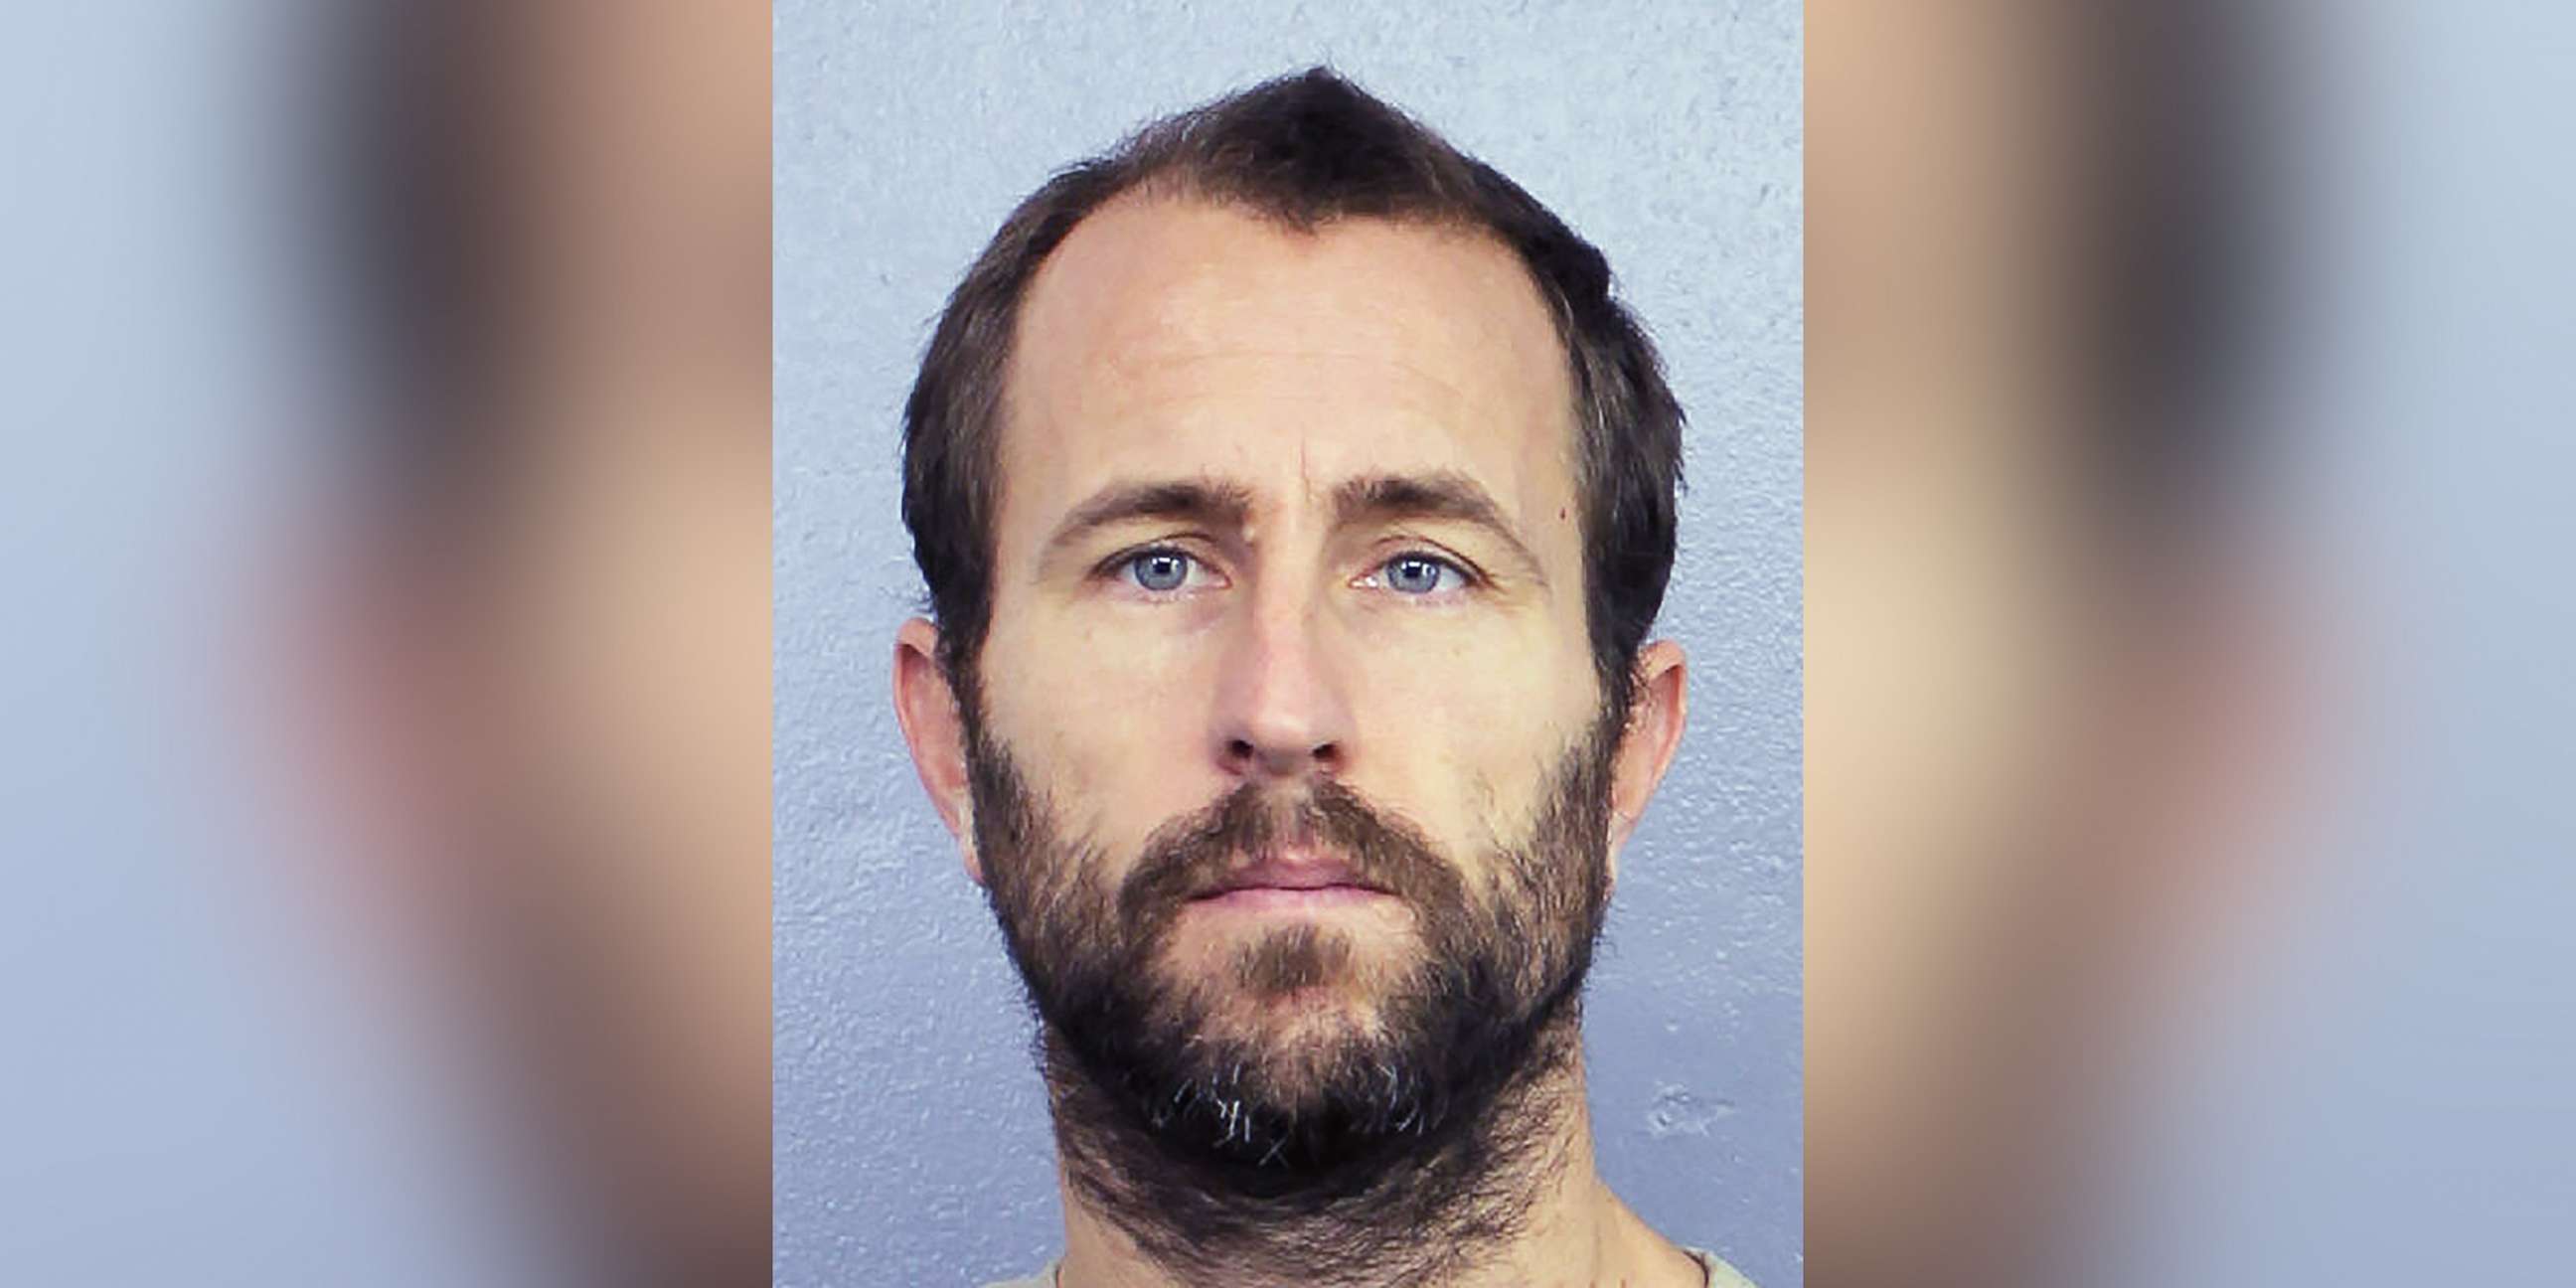 PHOTO: Lewis Bennett is pictured in an undated booking photo released by the Broward Sheriff's office in Florida.